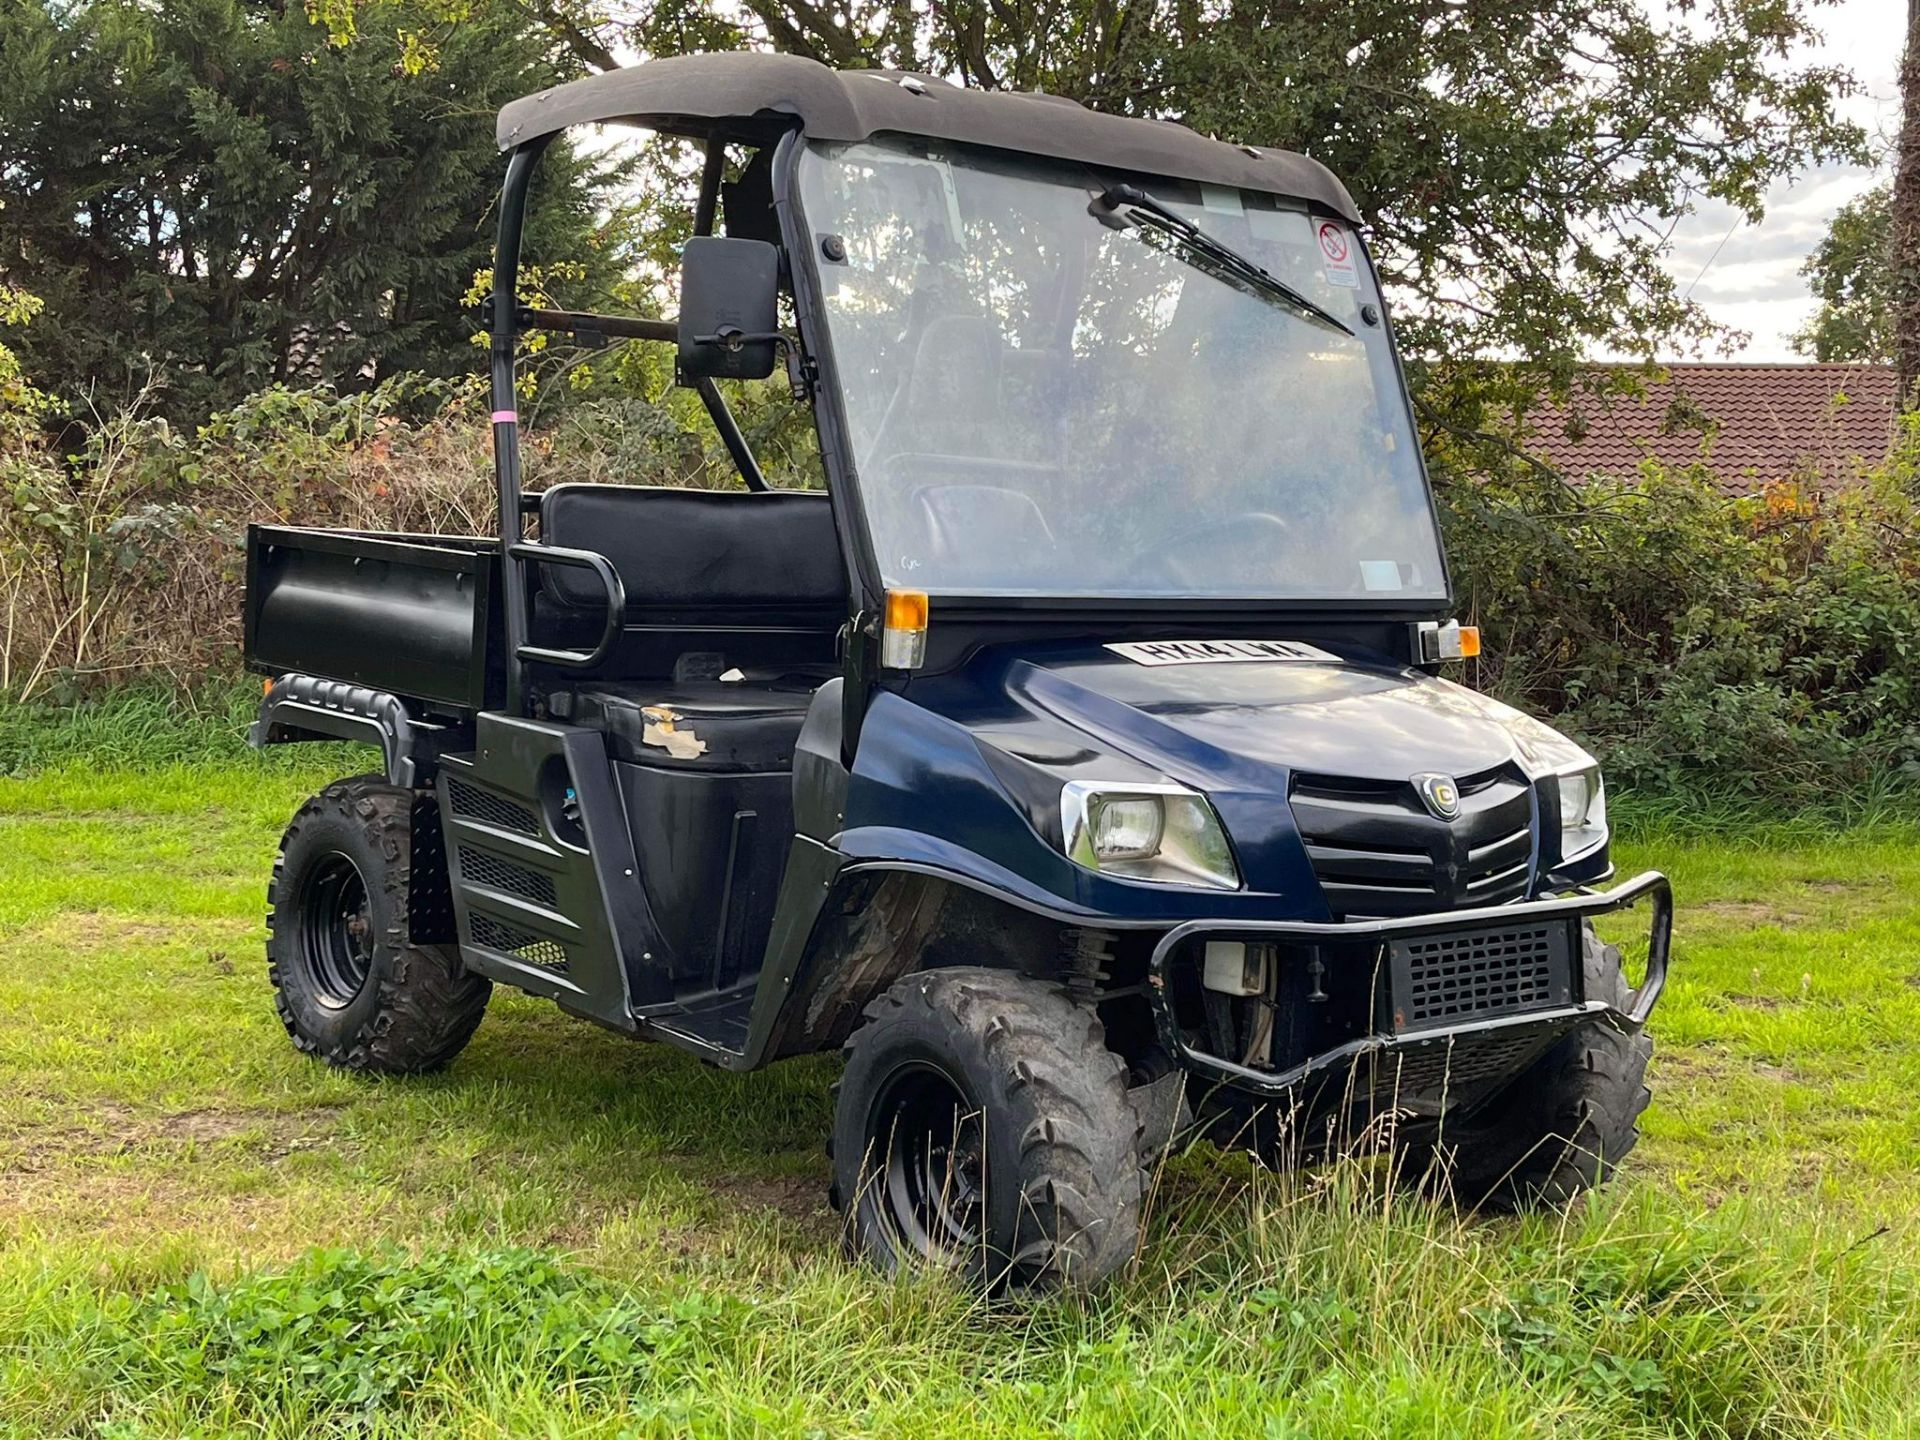 2014 CUSHMAN 1600 XDR BUGGY - 4 WHEEL DRIVE - GOOD TYRES ALL AROUND *PLUS VAT* - Image 2 of 8